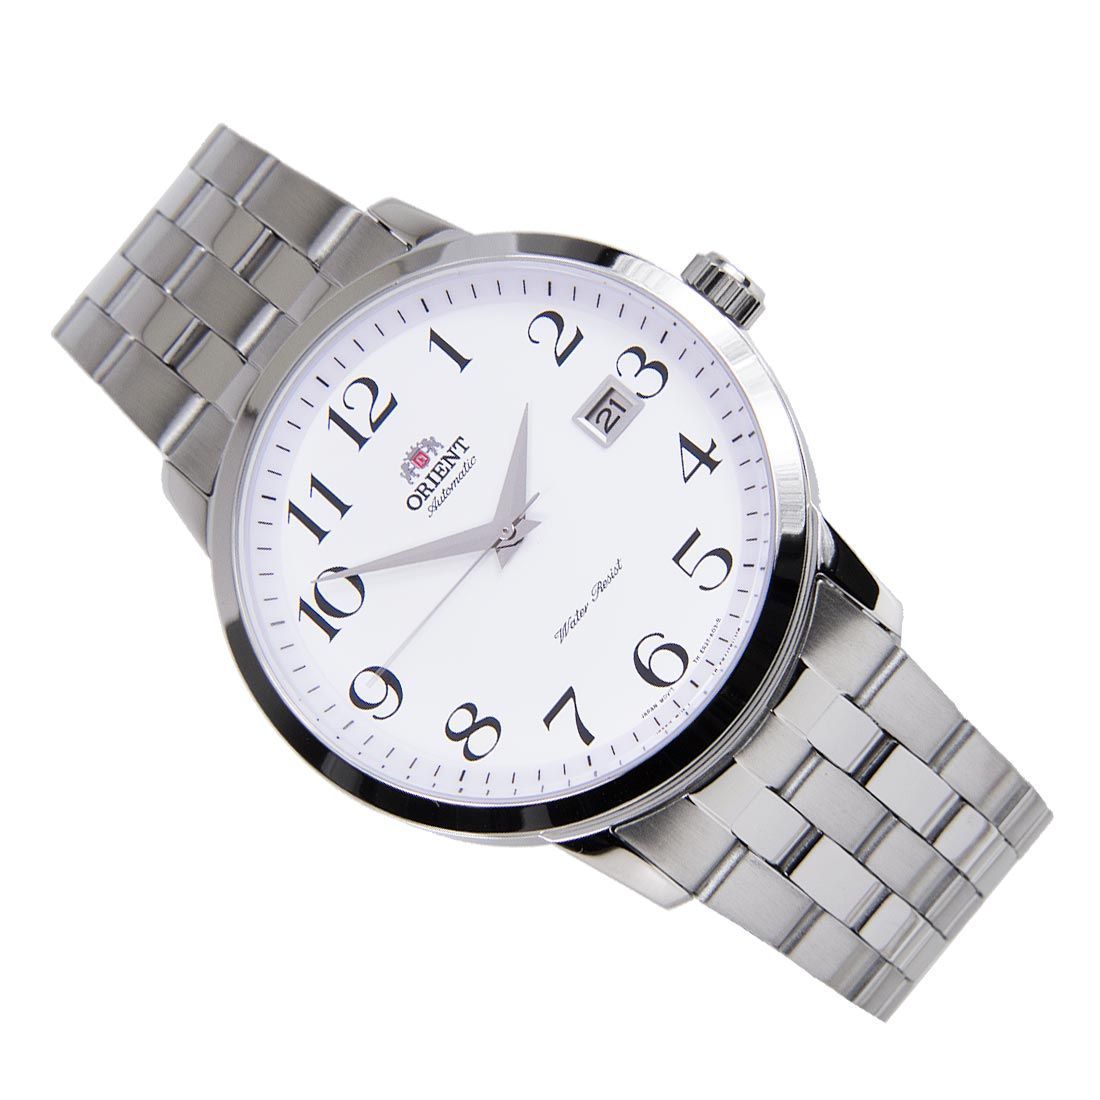 Orient FER2700DW0 ER2700DW Mechanical White Dial Mens Stainless Steel Watch -Orient